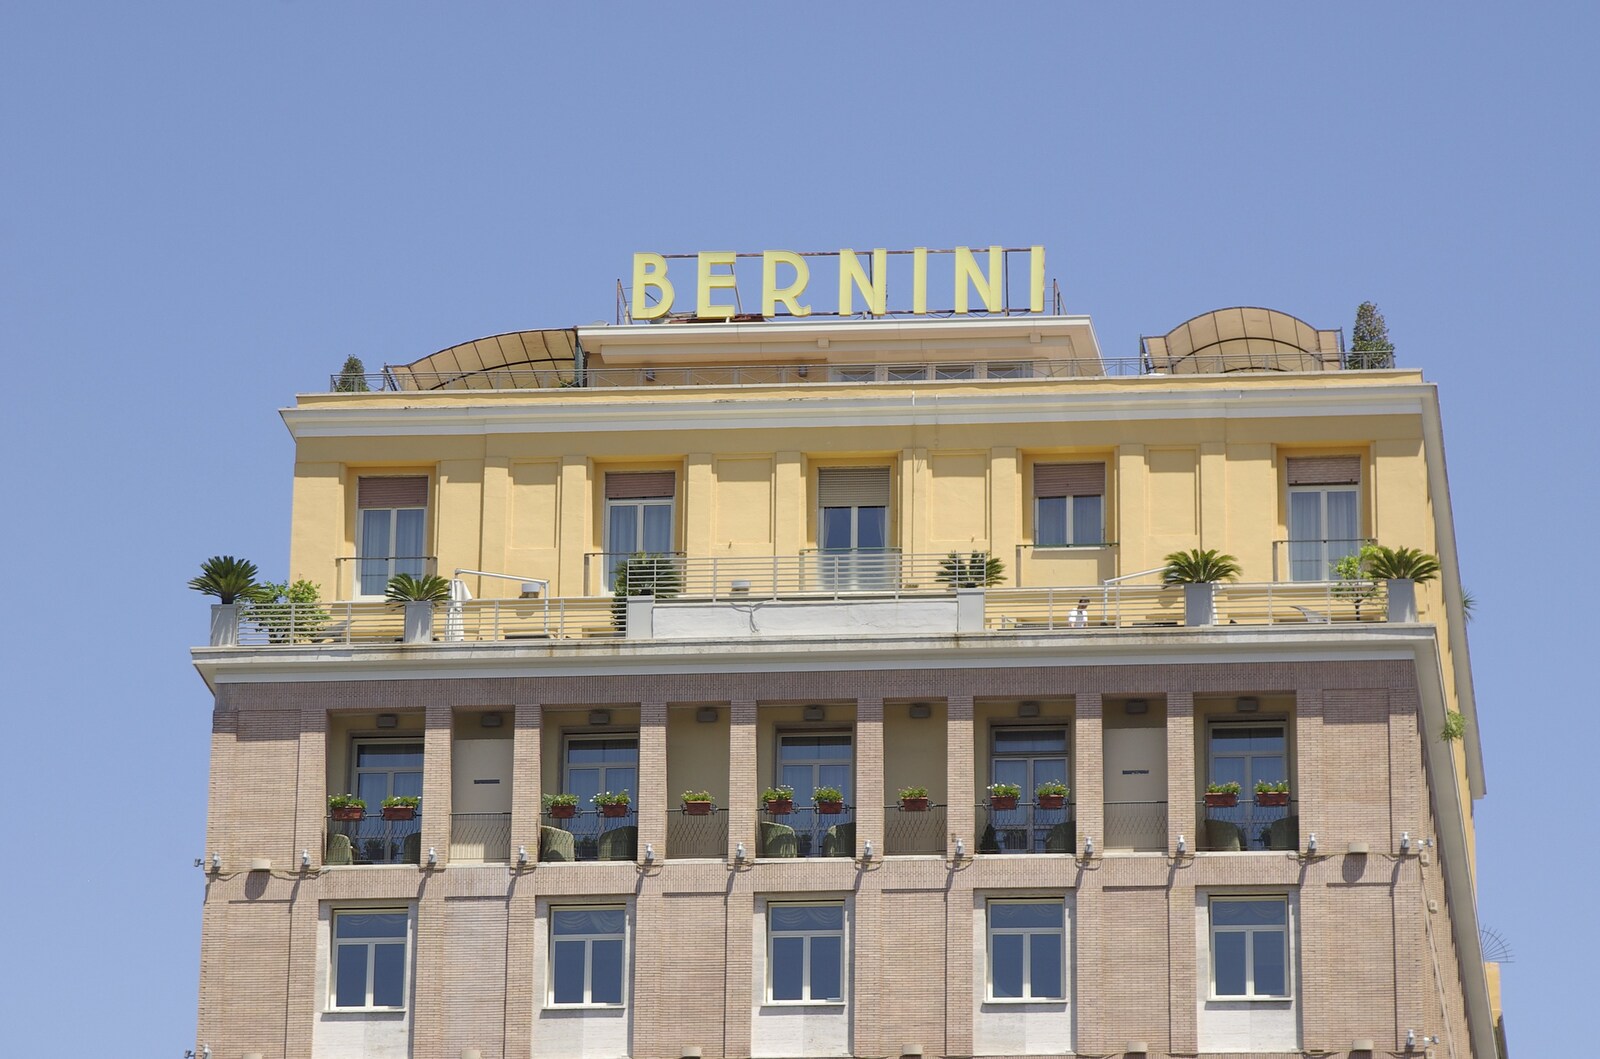 Cool 'Bernini' hotel sign from A Sojourn in The Eternal City, Rome, Italy - 22nd July 2008